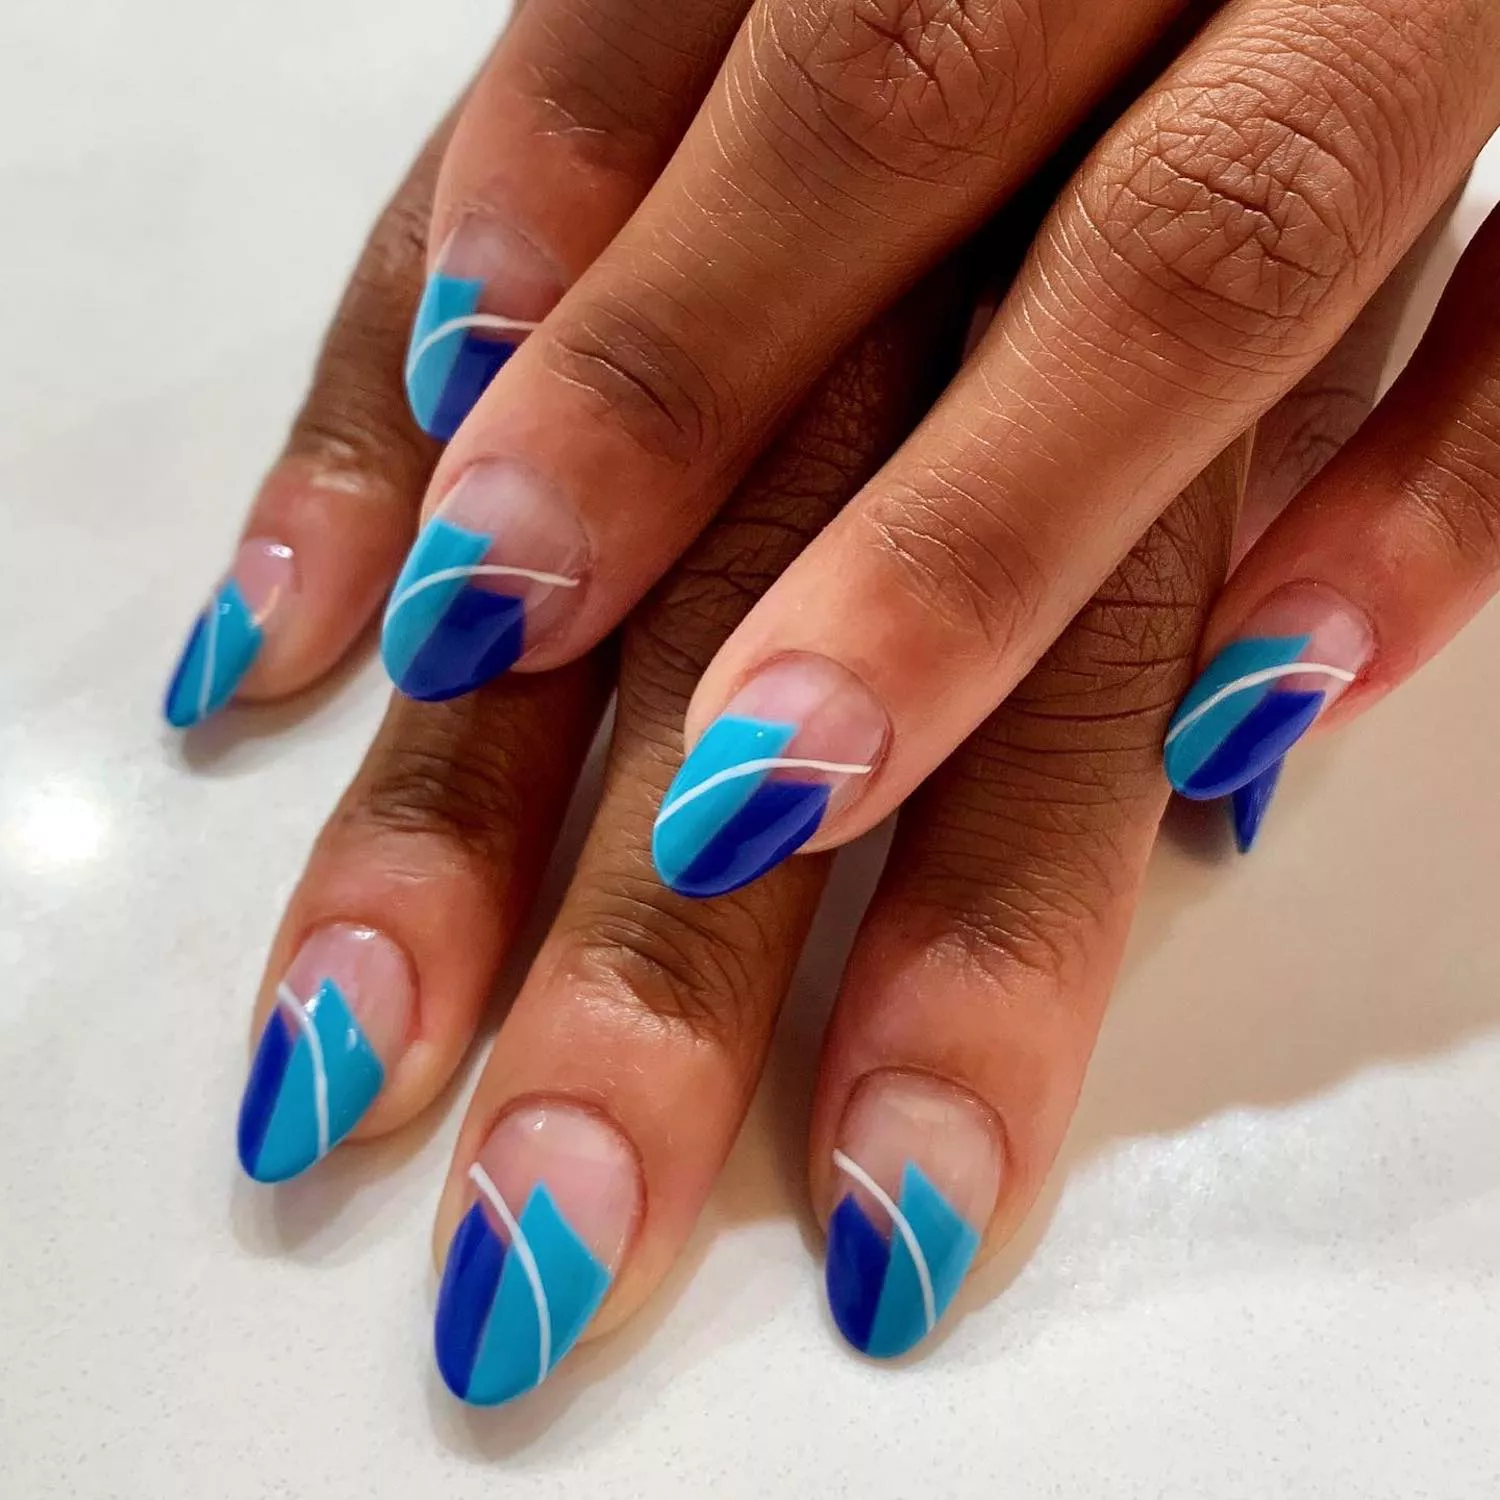 Manicure with blue geometric details and white accent line